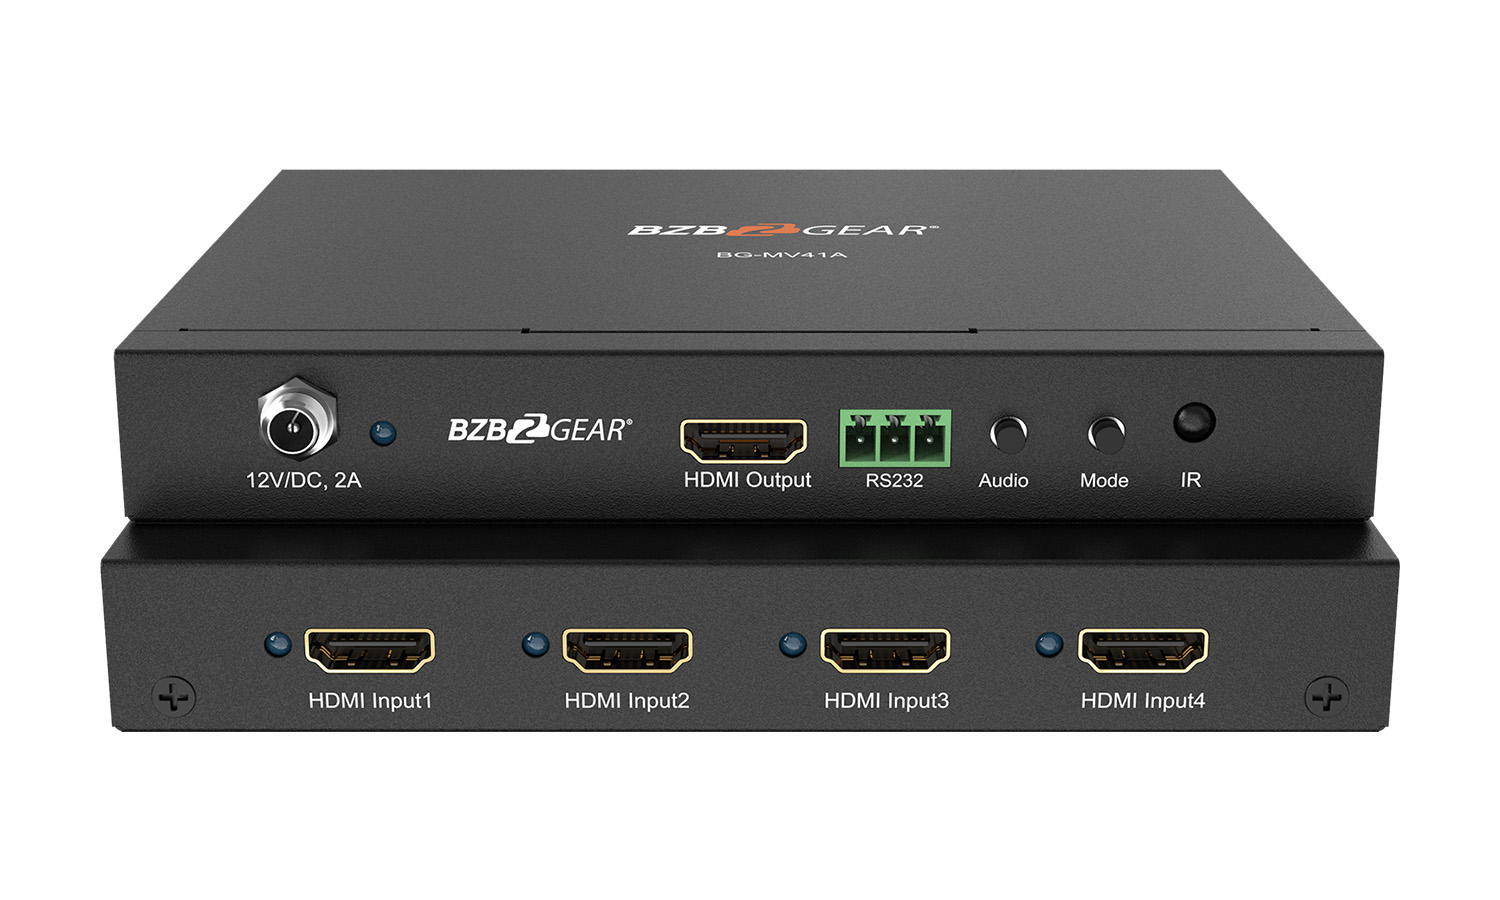 BG-MV41A 4x1 1080P FHD HMDI Switcher Scaler and MultiViewer with IR/RS232 by BZBGEAR